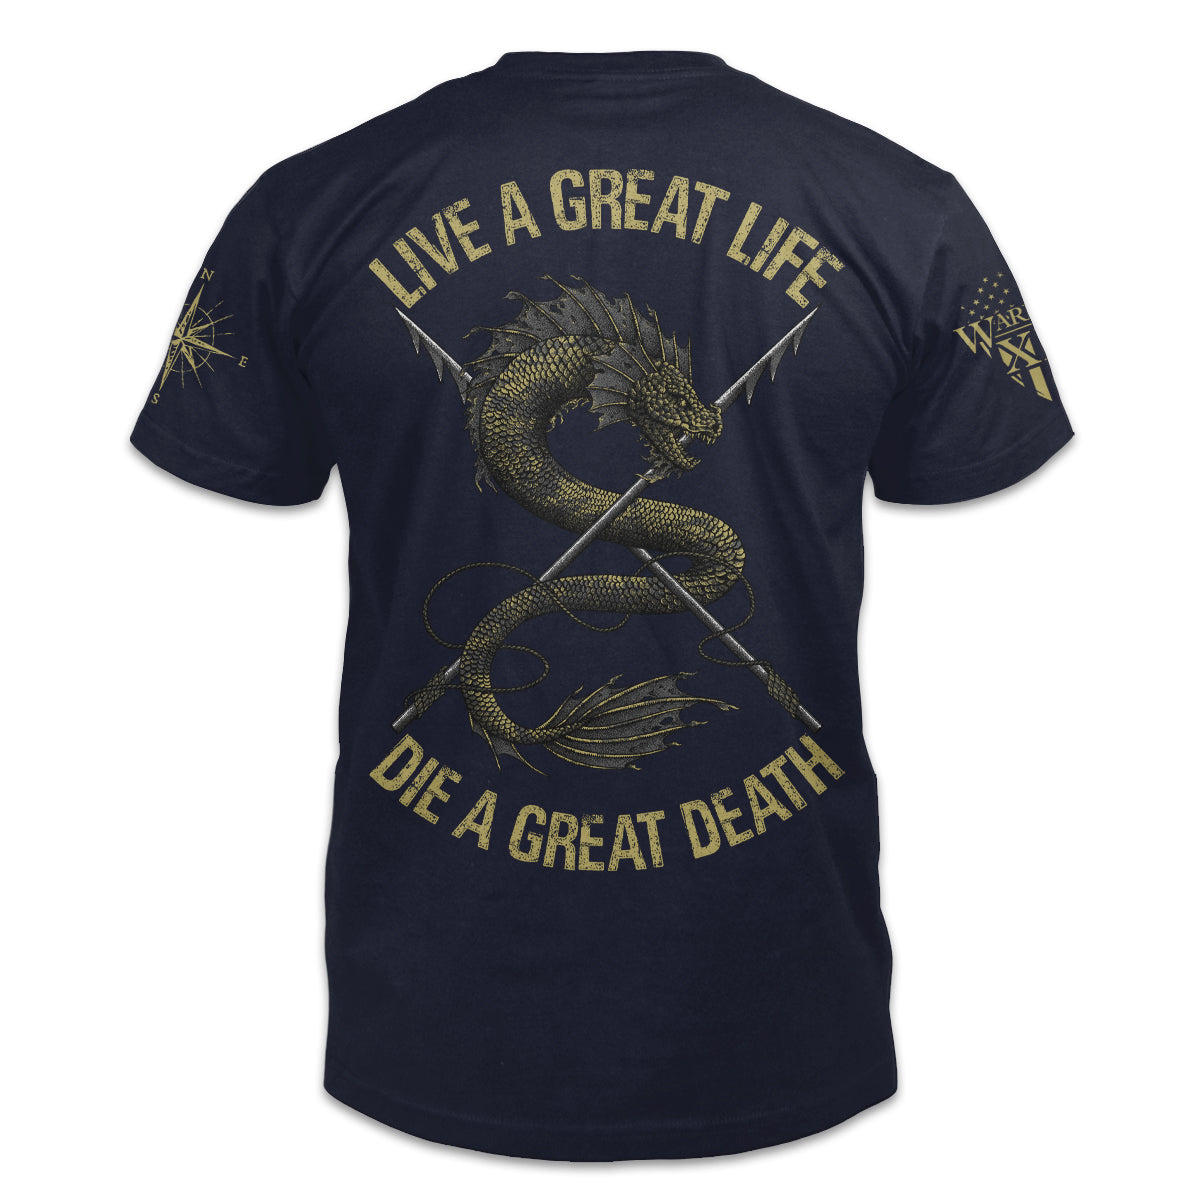 A navy blue t-shirt with the words "Live a Great Life. Die A Great Death" with a sea creature and two spears printed on the back of the shirt.